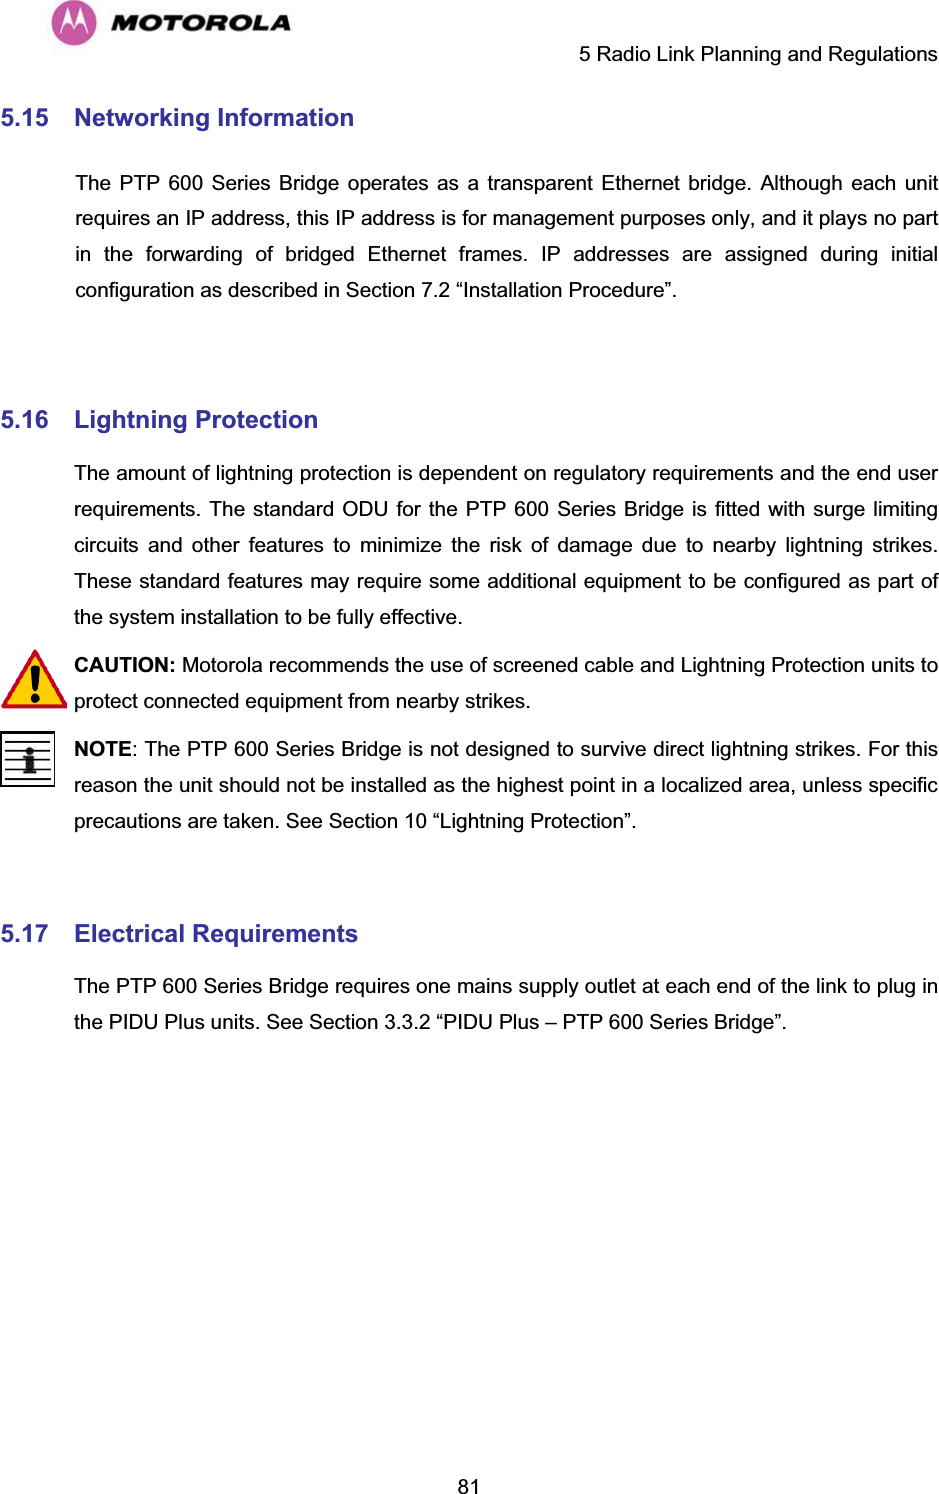     5 Radio Link Planning and Regulations  815.15 Networking Information    The PTP 600 Series Bridge operates as a transparent Ethernet bridge. Although each unit requires an IP address, this IP address is for management purposes only, and it plays no part in the forwarding of bridged Ethernet frames. IP addresses are assigned during initial configuration as described in Section 7.2 “Installation Procedure”.   5.16 Lightning ProtectionThe amount of lightning protection is dependent on regulatory requirements and the end user requirements. The standard ODU for the PTP 600 Series Bridge is fitted with surge limiting circuits and other features to minimize the risk of damage due to nearby lightning strikes. These standard features may require some additional equipment to be configured as part of the system installation to be fully effective.  CAUTION: Motorola recommends the use of screened cable and Lightning Protection units to protect connected equipment from nearby strikes.  NOTE: The PTP 600 Series Bridge is not designed to survive direct lightning strikes. For this reason the unit should not be installed as the highest point in a localized area, unless specific precautions are taken. See Section 10 “Lightning Protection”.  5.17 Electrical RequirementsThe PTP 600 Series Bridge requires one mains supply outlet at each end of the link to plug in the PIDU Plus units. See Section 3.3.2 “PIDU Plus – PTP 600 Series Bridge”.   